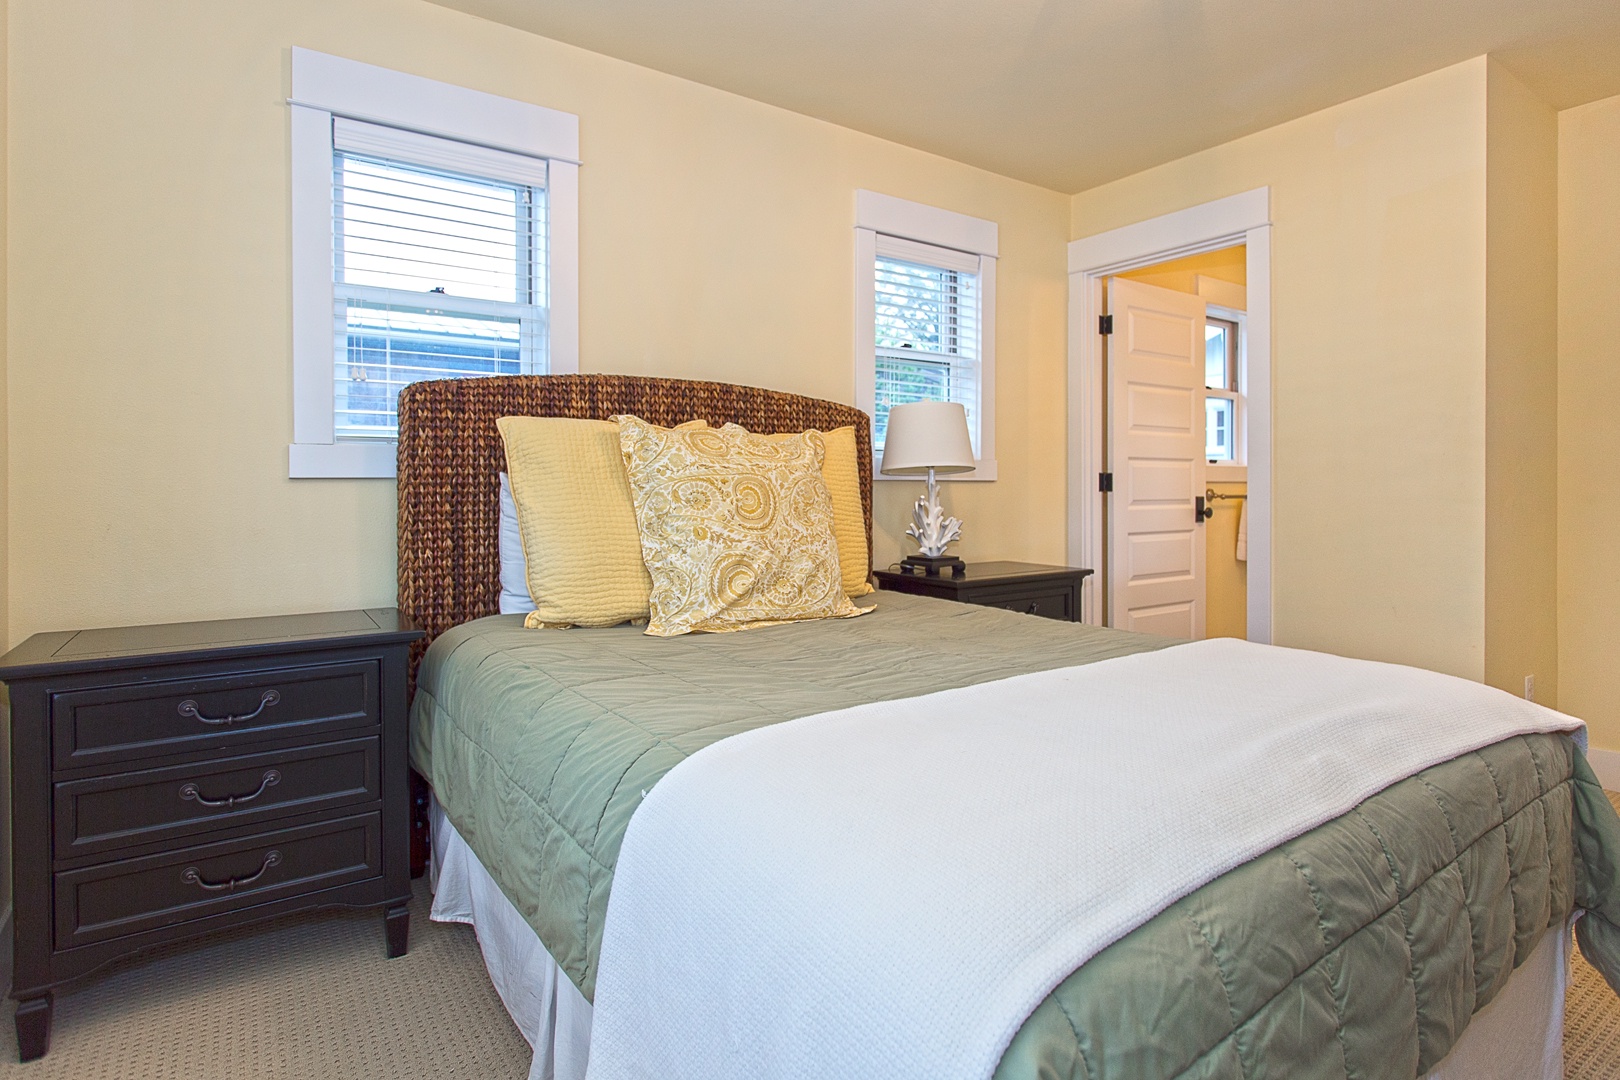 Carriage house - queen bed, flat screen TV, full bathroom